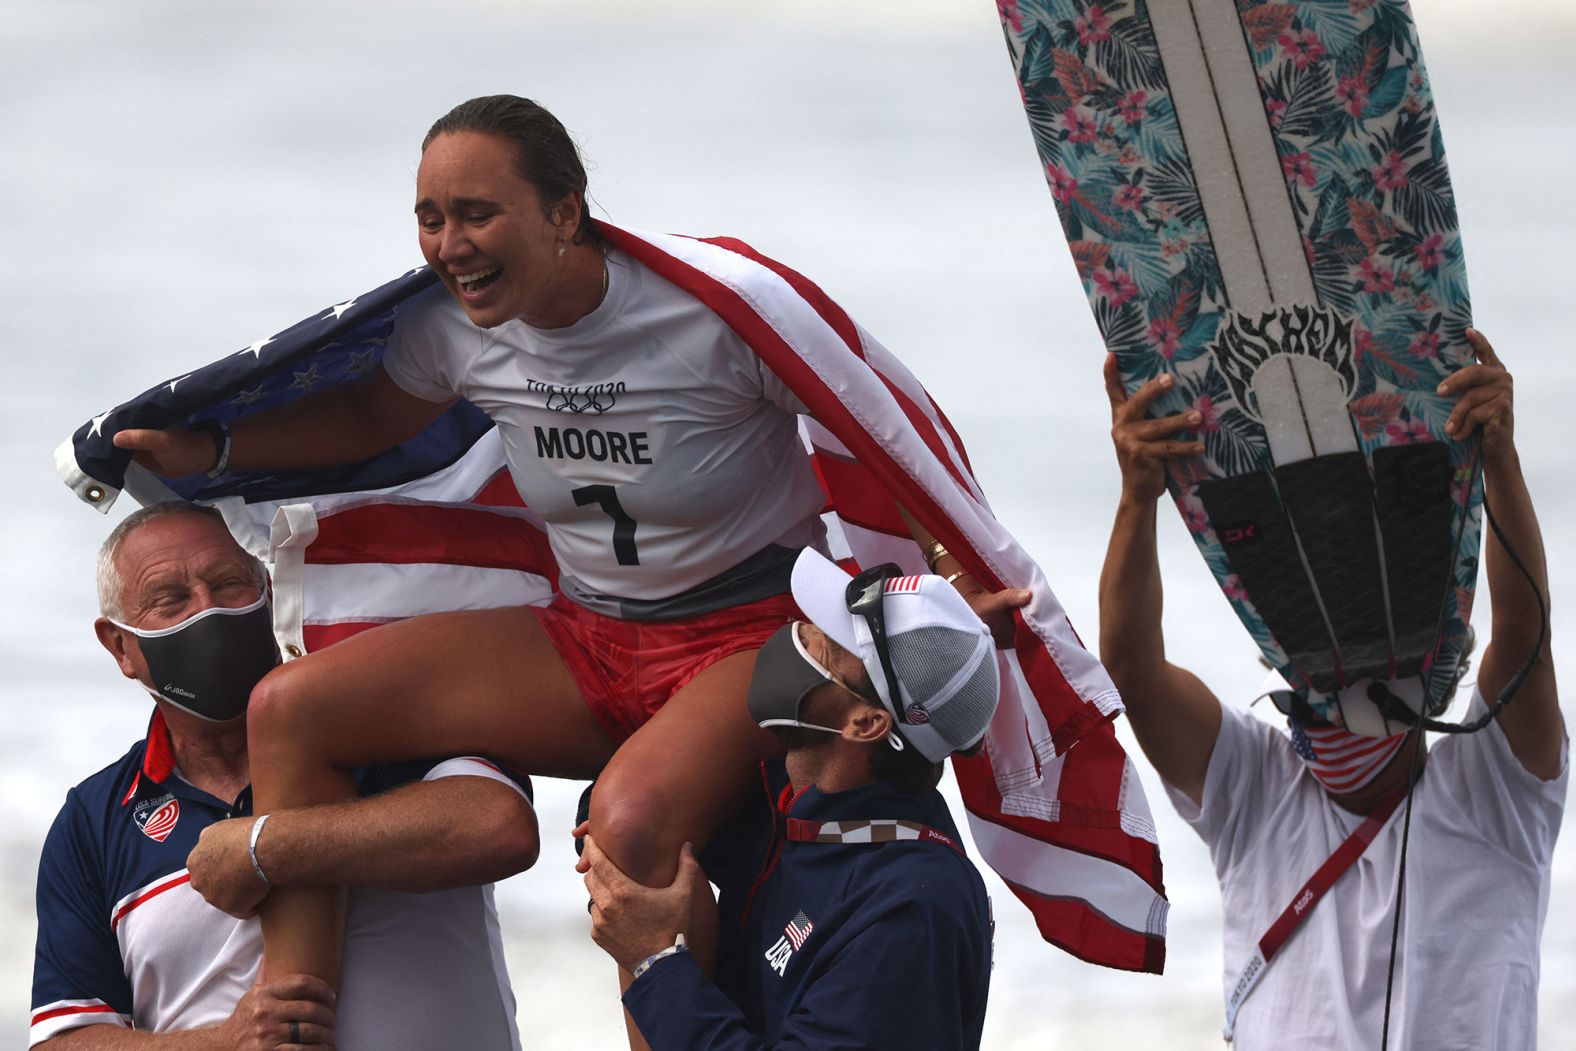 The United States' Carissa Moore celebrates after <a href="index.php?page=&url=https%3A%2F%2Fwww.cnn.com%2Fworld%2Flive-news%2Ftokyo-2020-olympics-07-27-21-spt%2Fh_fef4a80c23cb5ec5e96752ab3be966f2" target="_blank">she won the first-ever Olympic gold medal in surfing</a> on July 27.